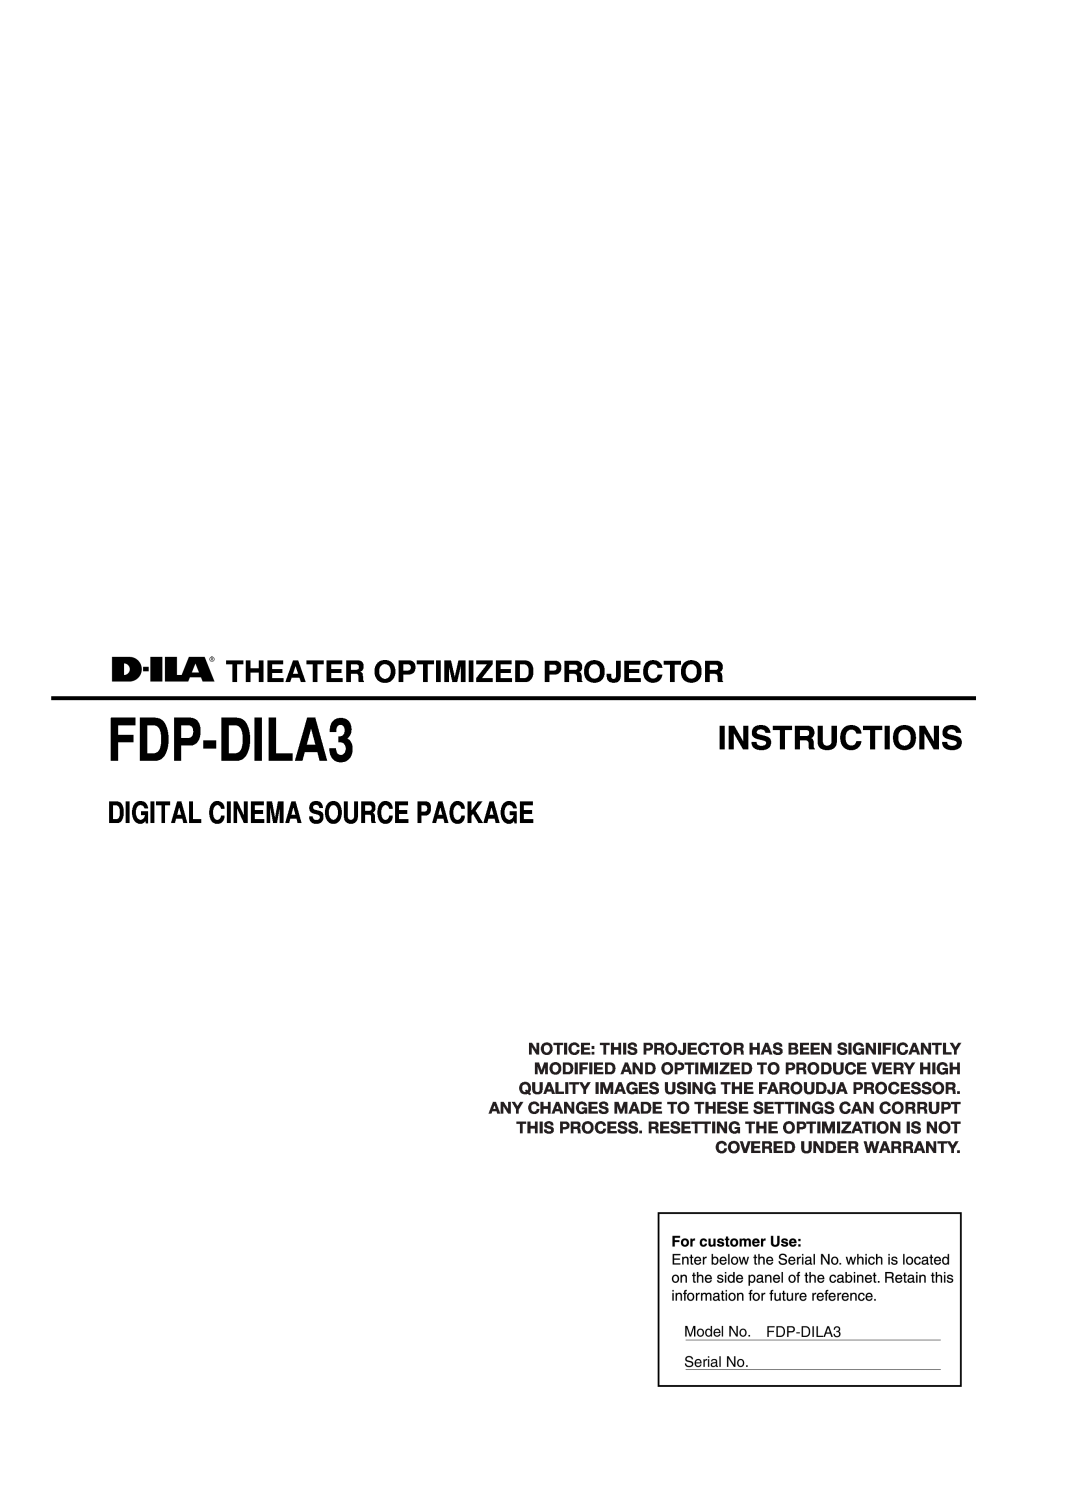 Meridian Audio FDP-DILA3 warranty Notice This Projector Has Been Significantly, Covered Under Warranty, Instructions 